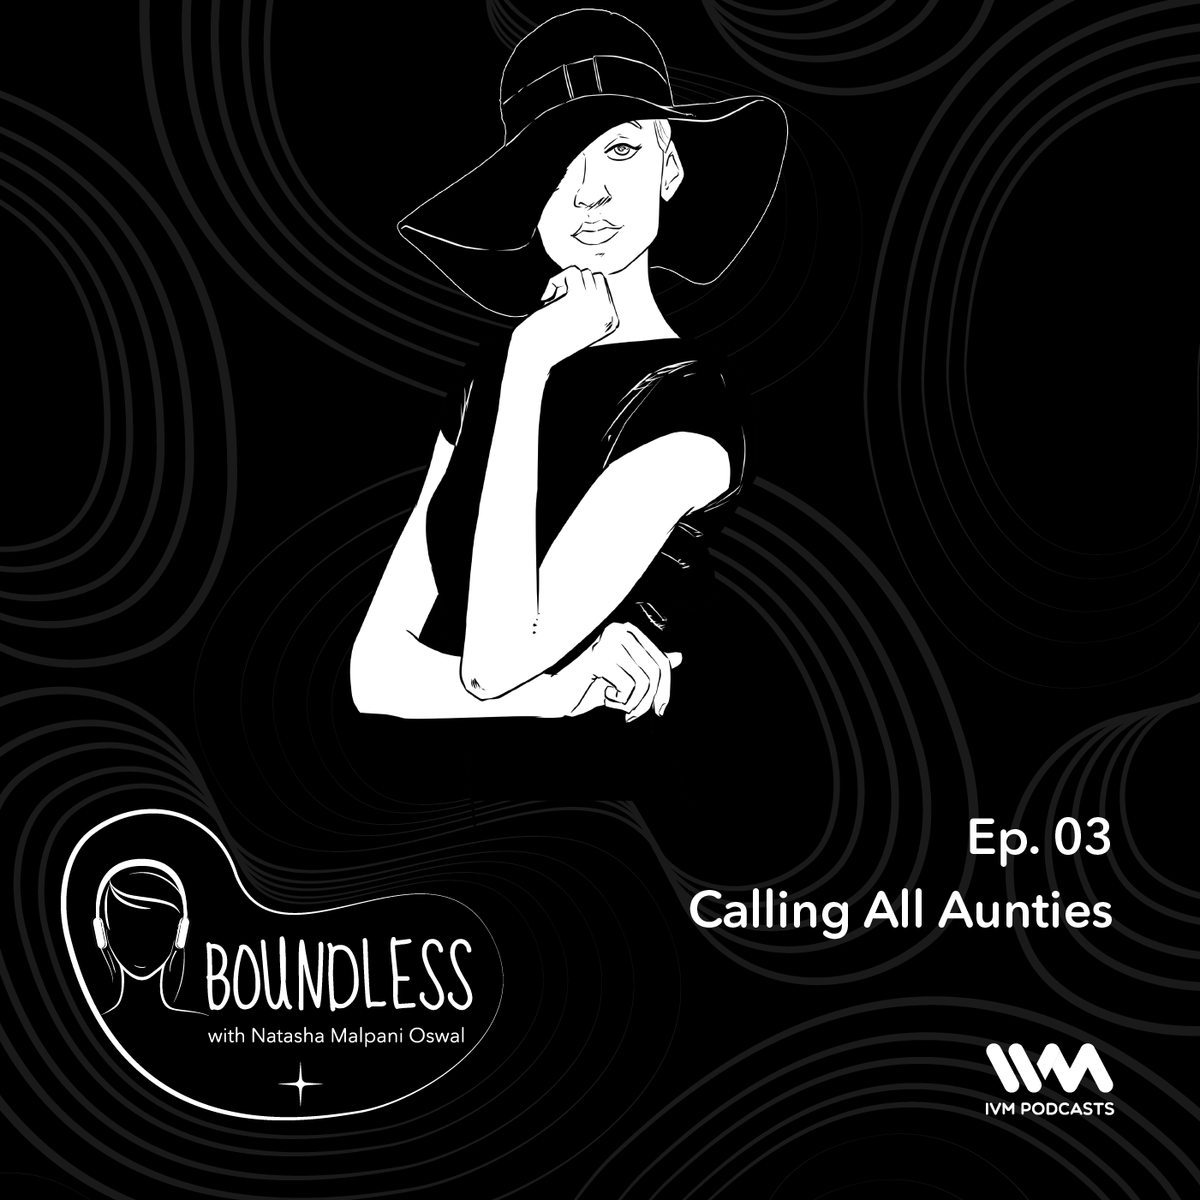 Ep. 03: Calling All Aunties